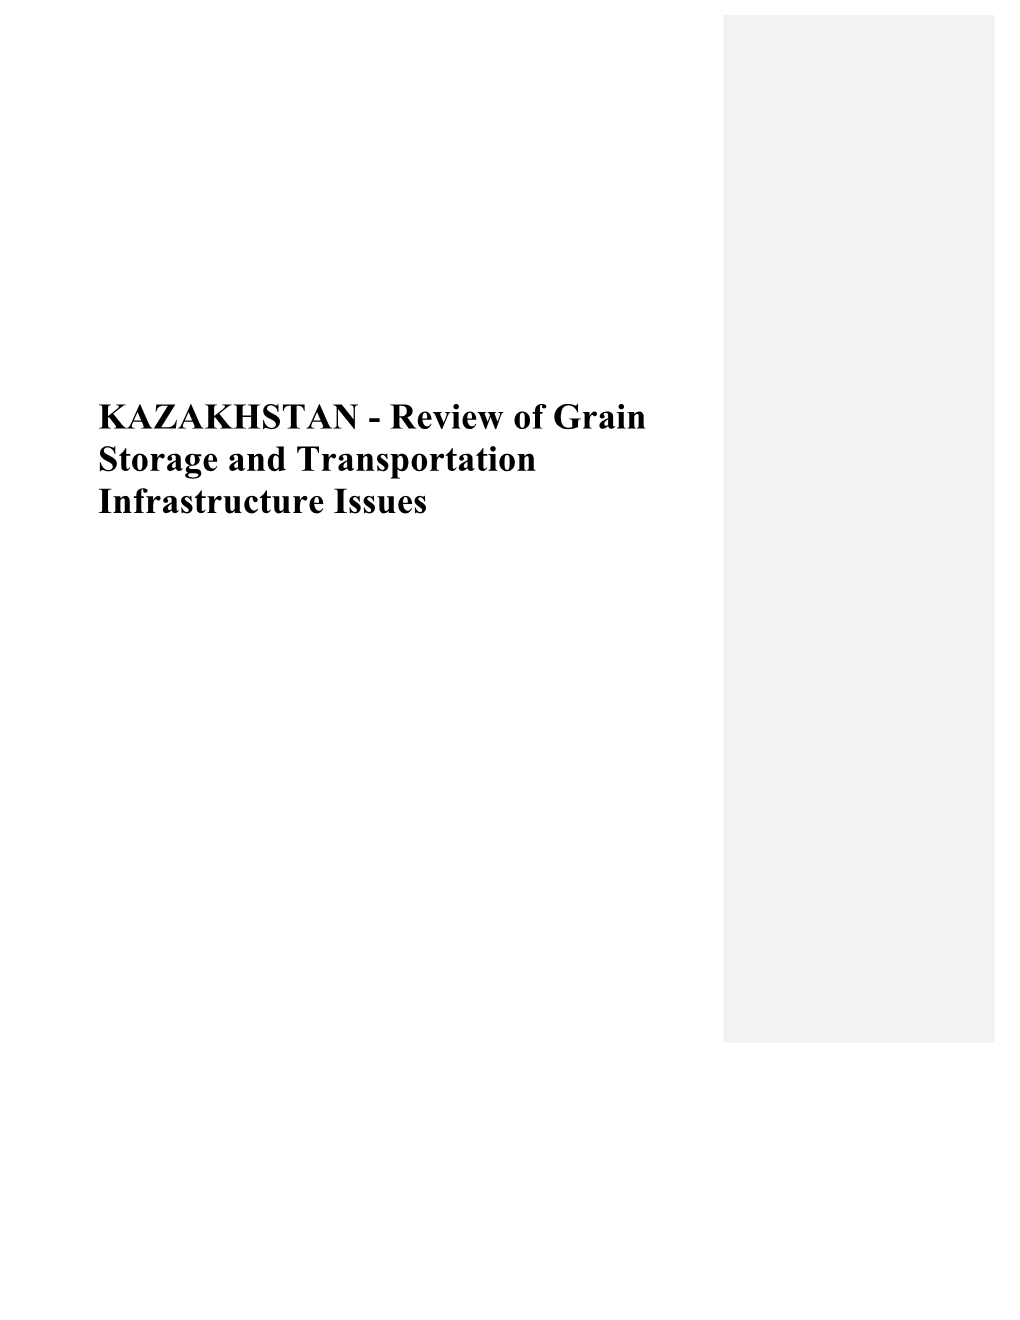 KAZAKHSTAN - Review of Grain Storage and Transportation Infrastructure Issues